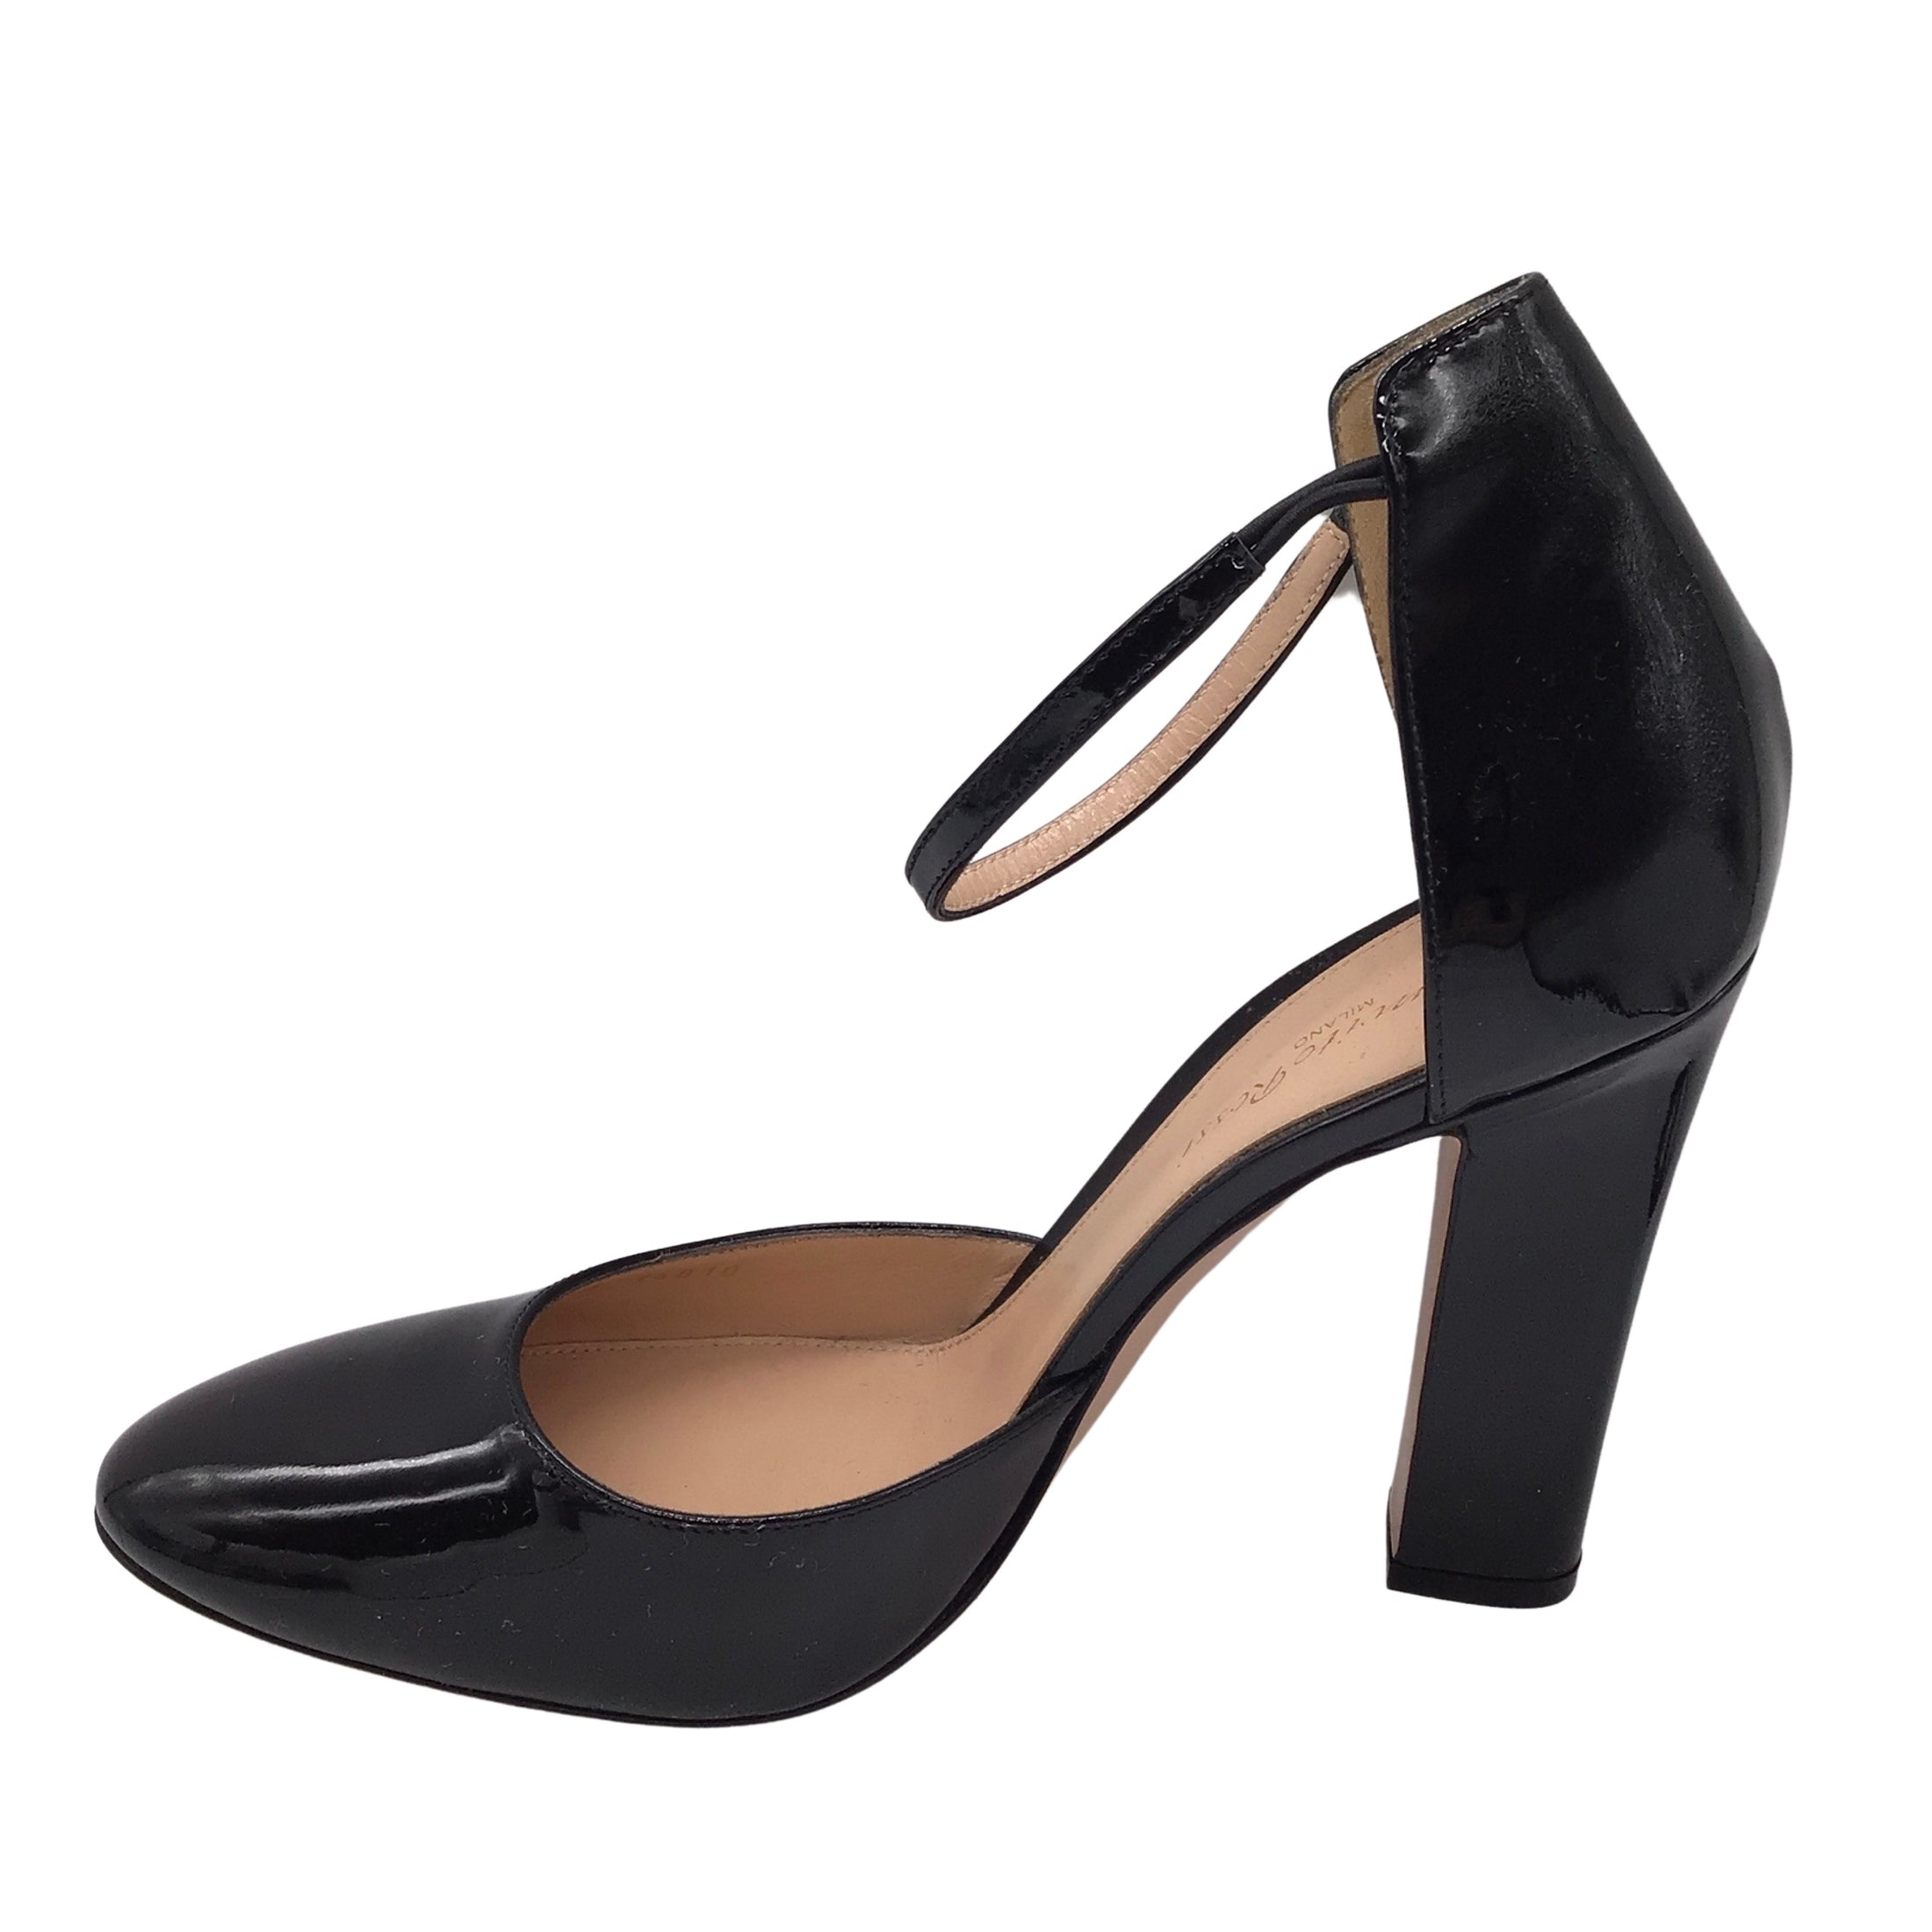 Gianvito Rossi Black Patent Leather Ankle Strap Heels